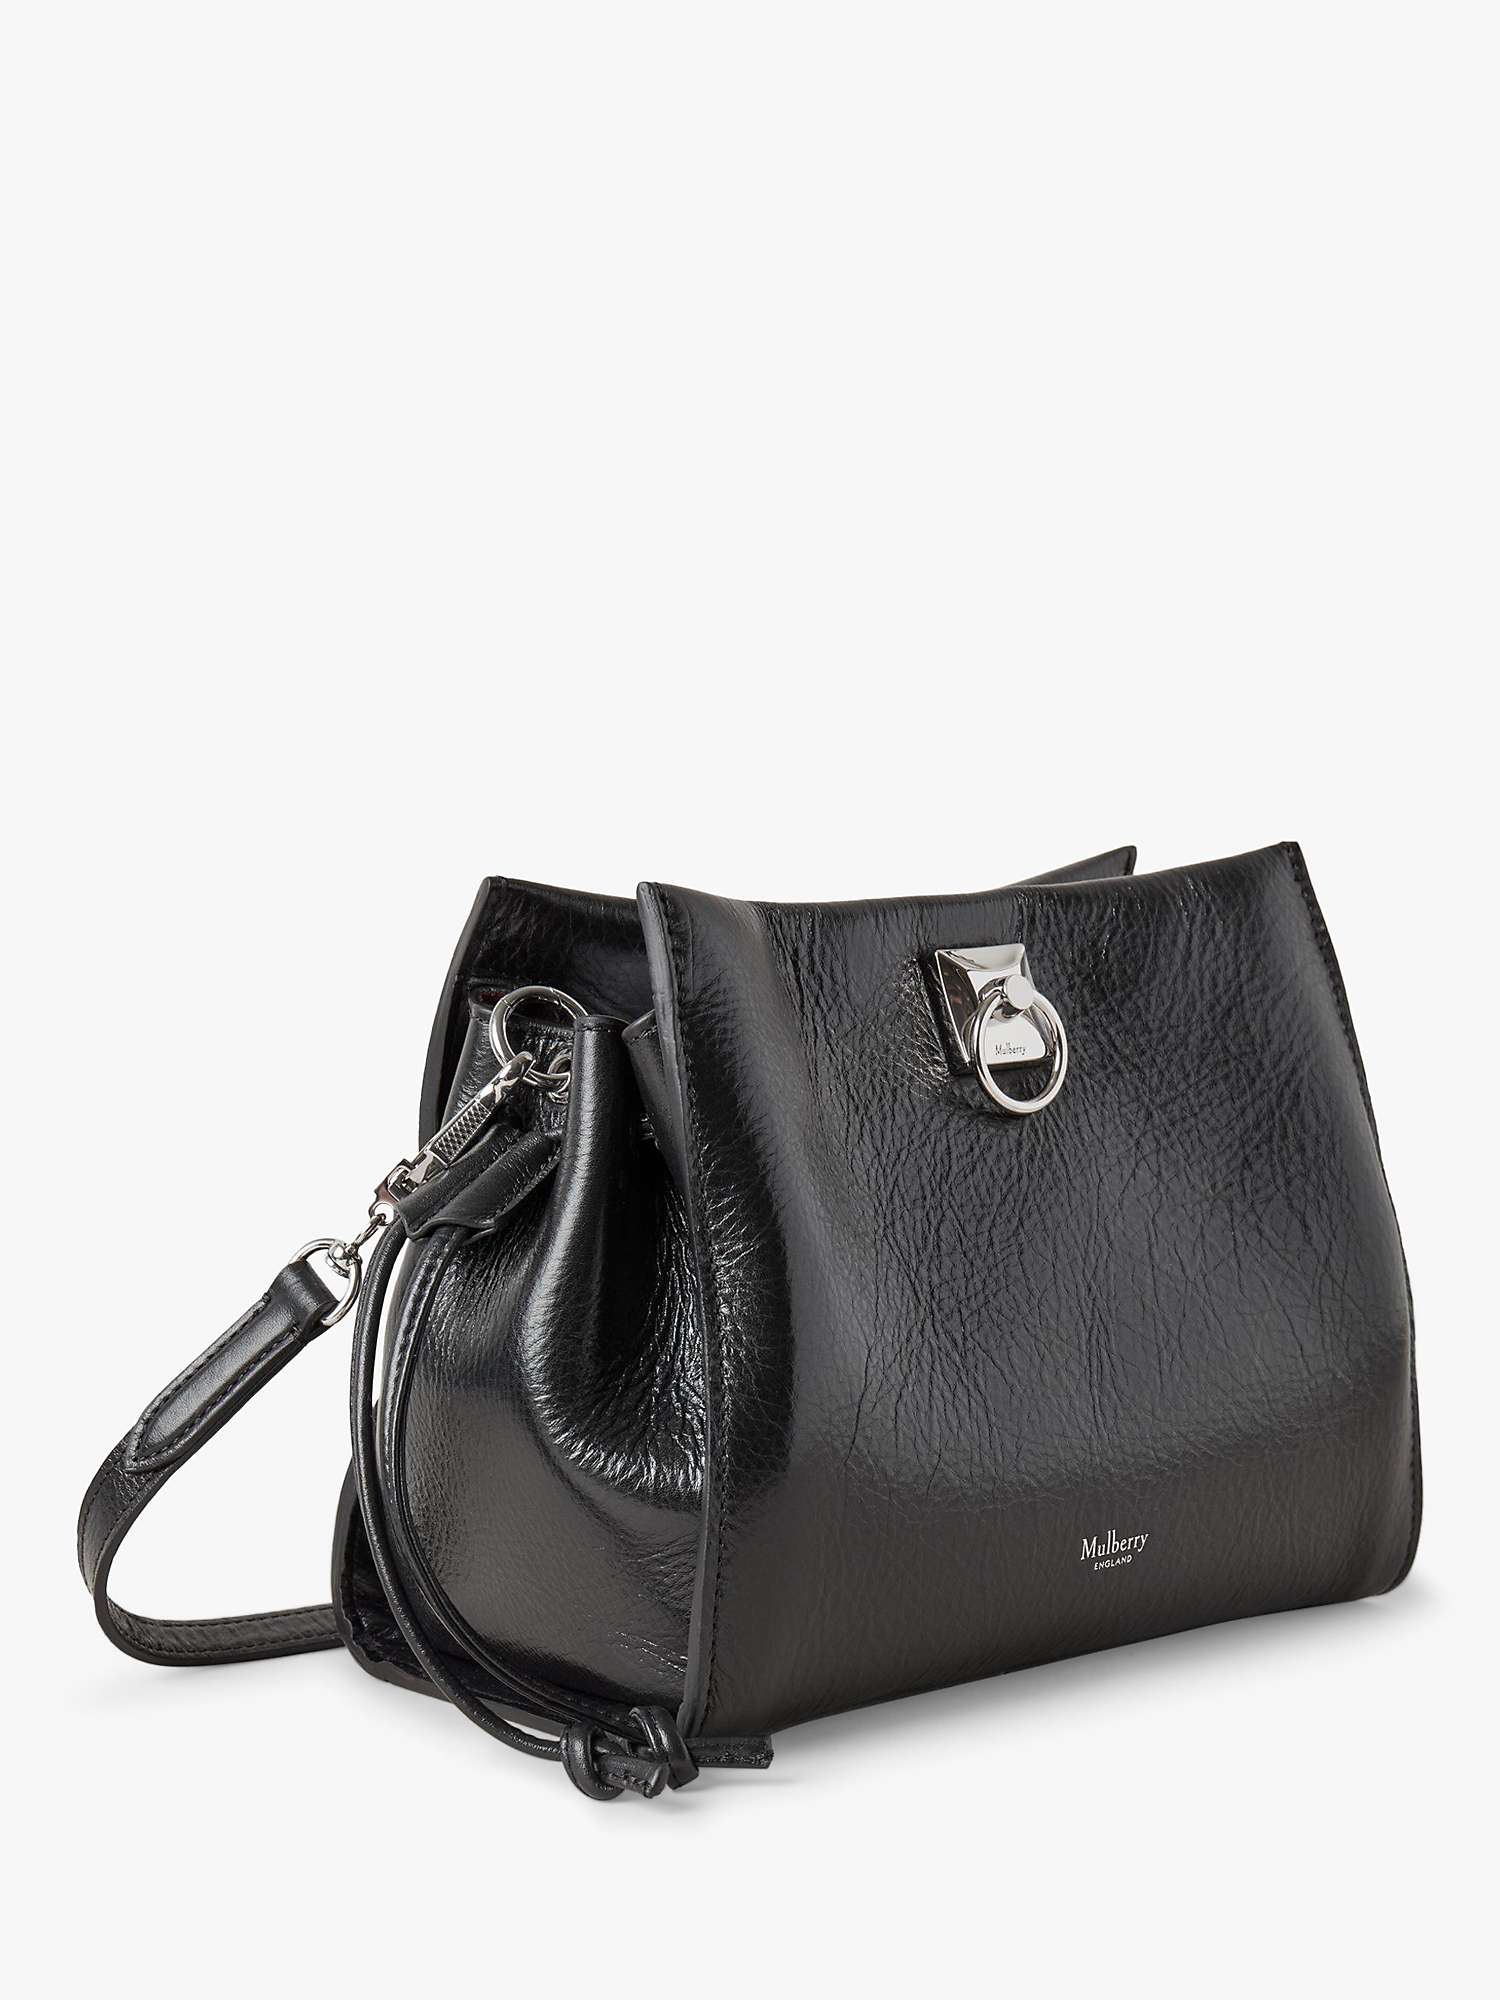 Buy Mulberry Small Iris High Shine Leather Shoulder Bag, Black Online at johnlewis.com